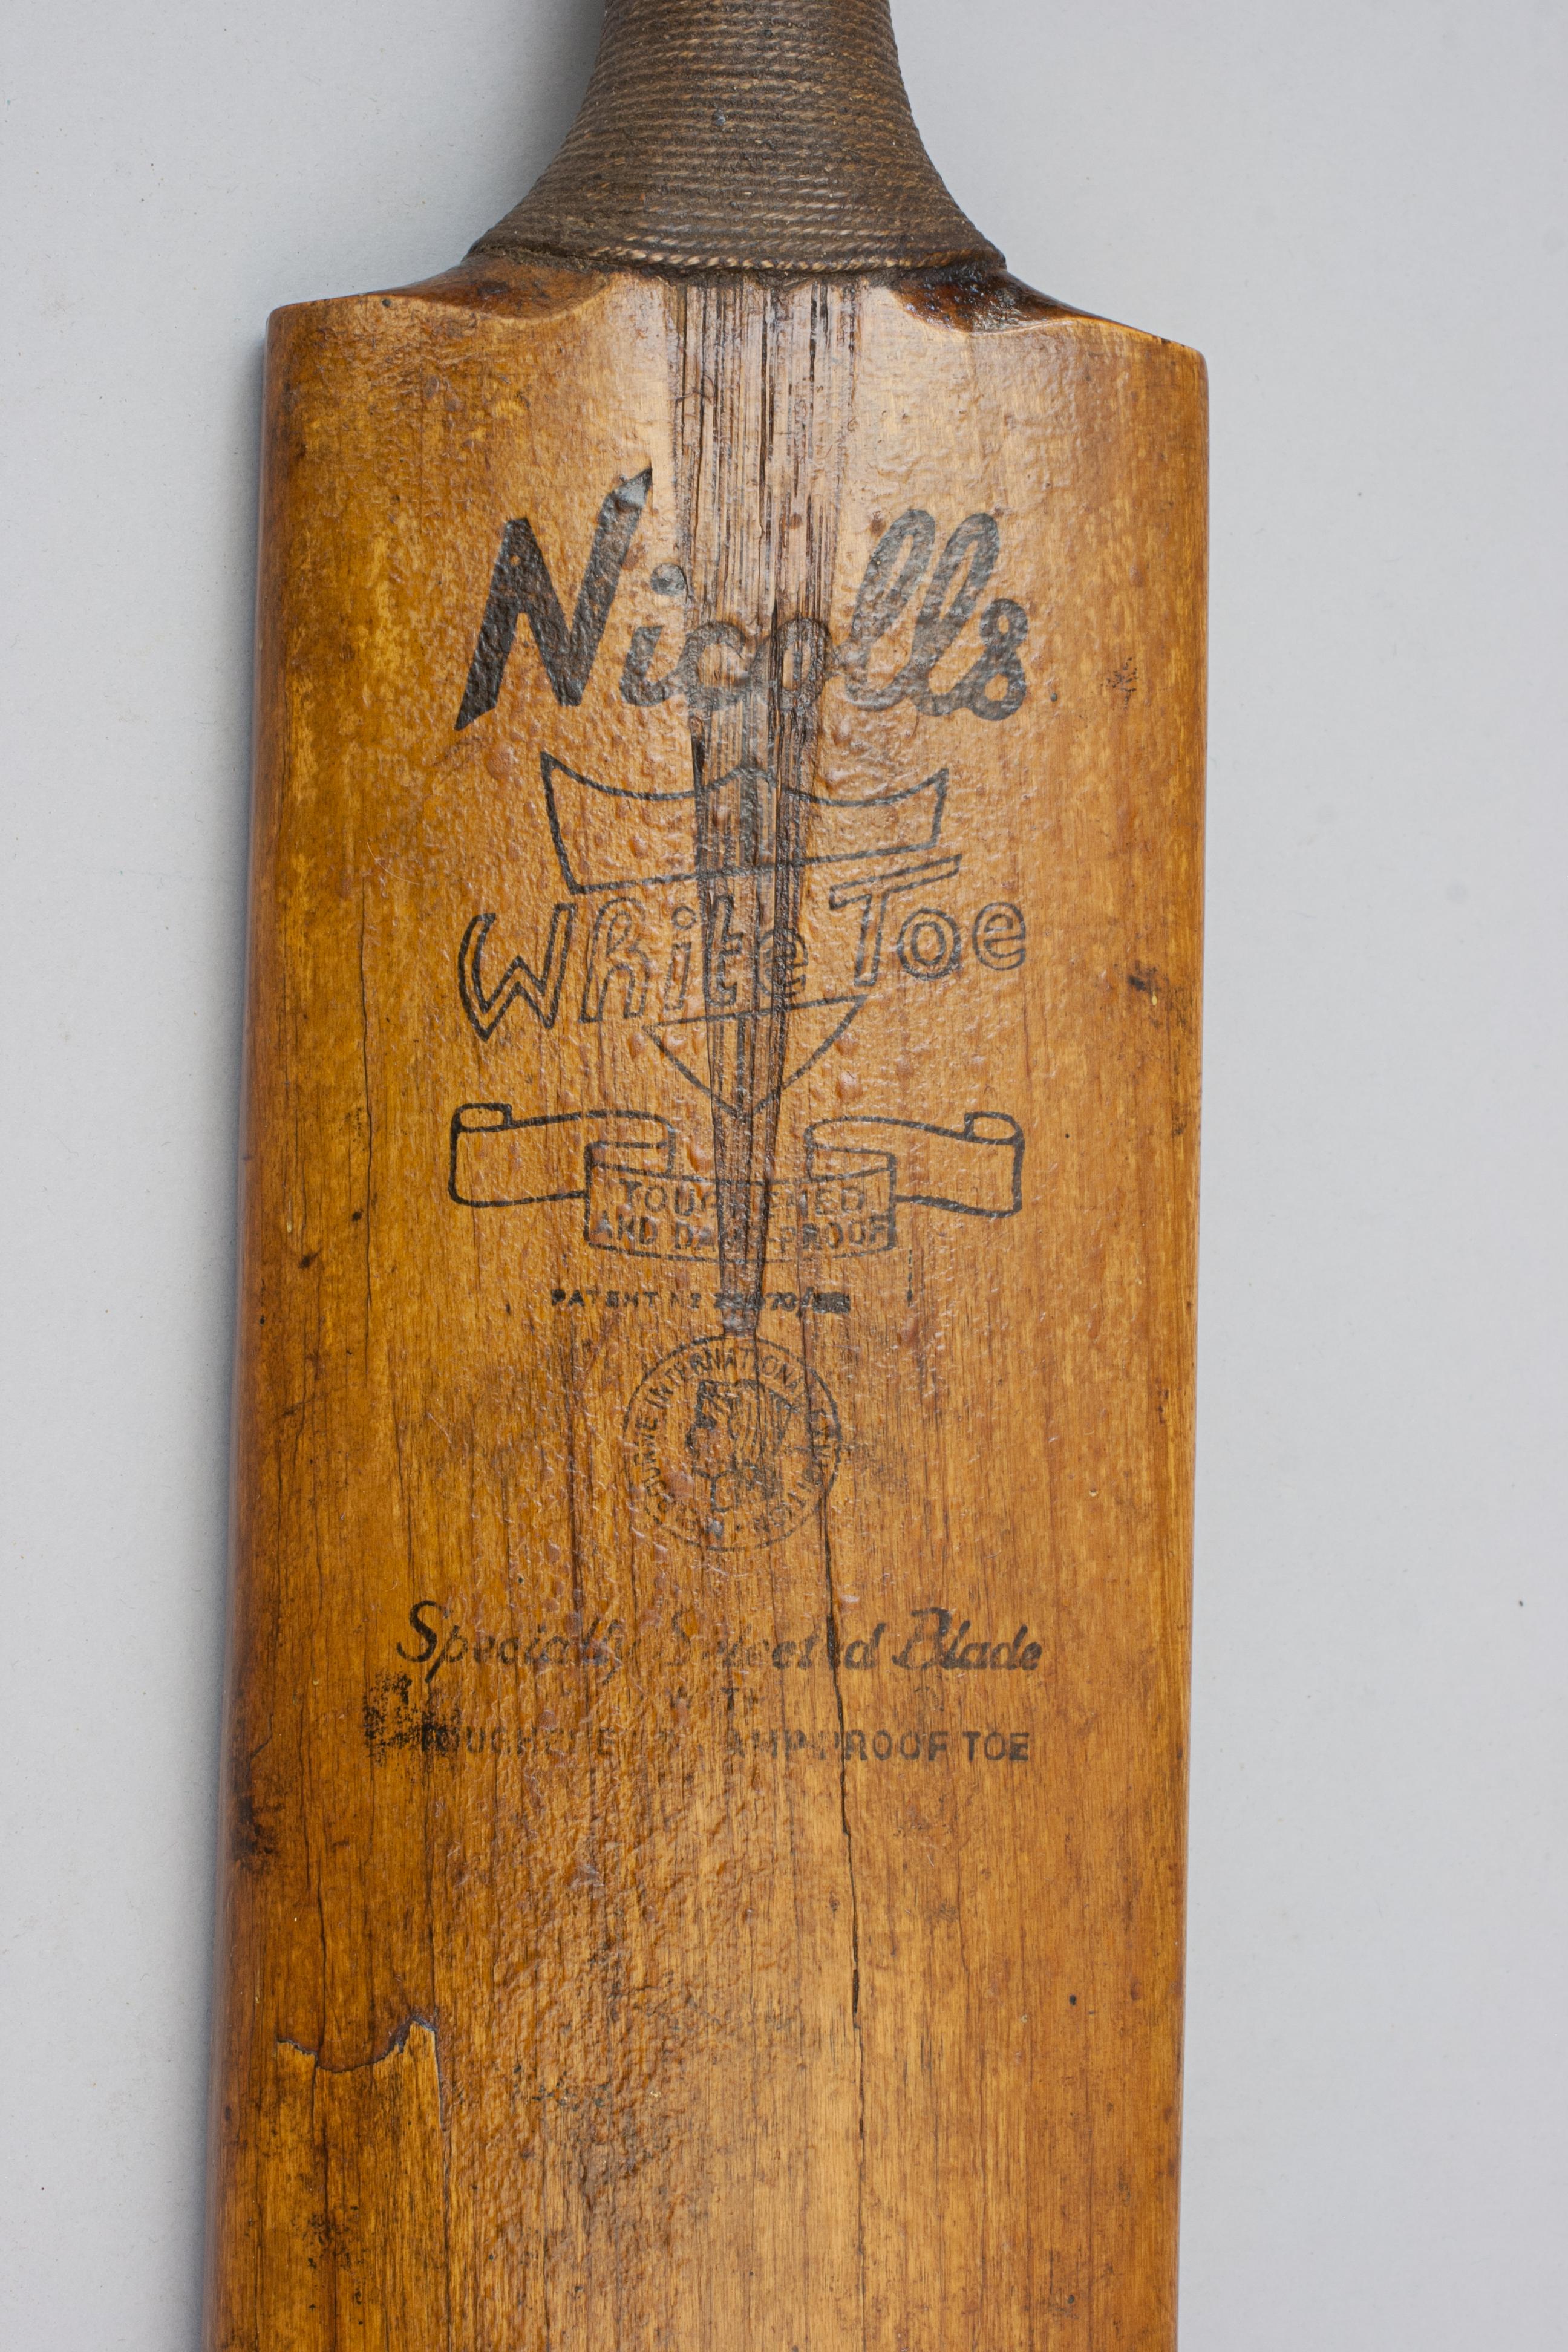  Vintage Cricket Bat, Nicolls 'White Toe' In Good Condition For Sale In Oxfordshire, GB